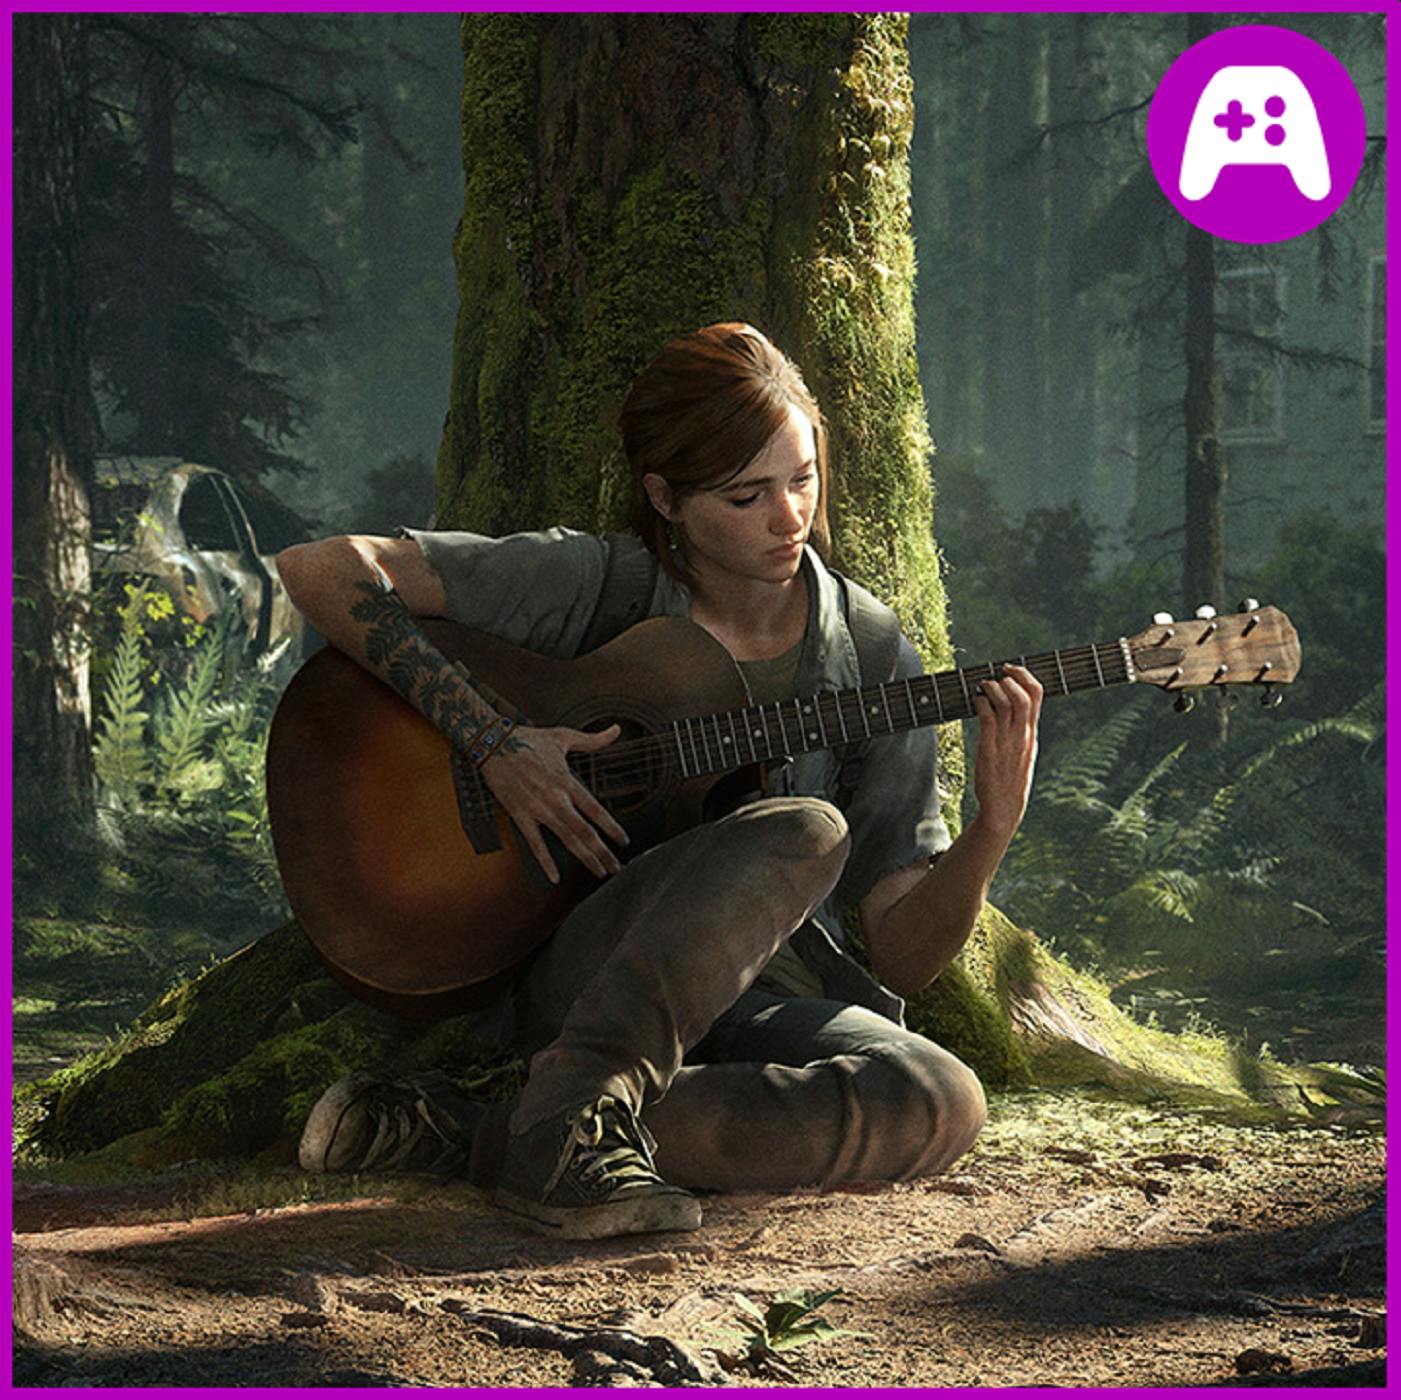 The Last of Us 2 LEAKED! [No spoilers] - WGG Live 04/27/2020